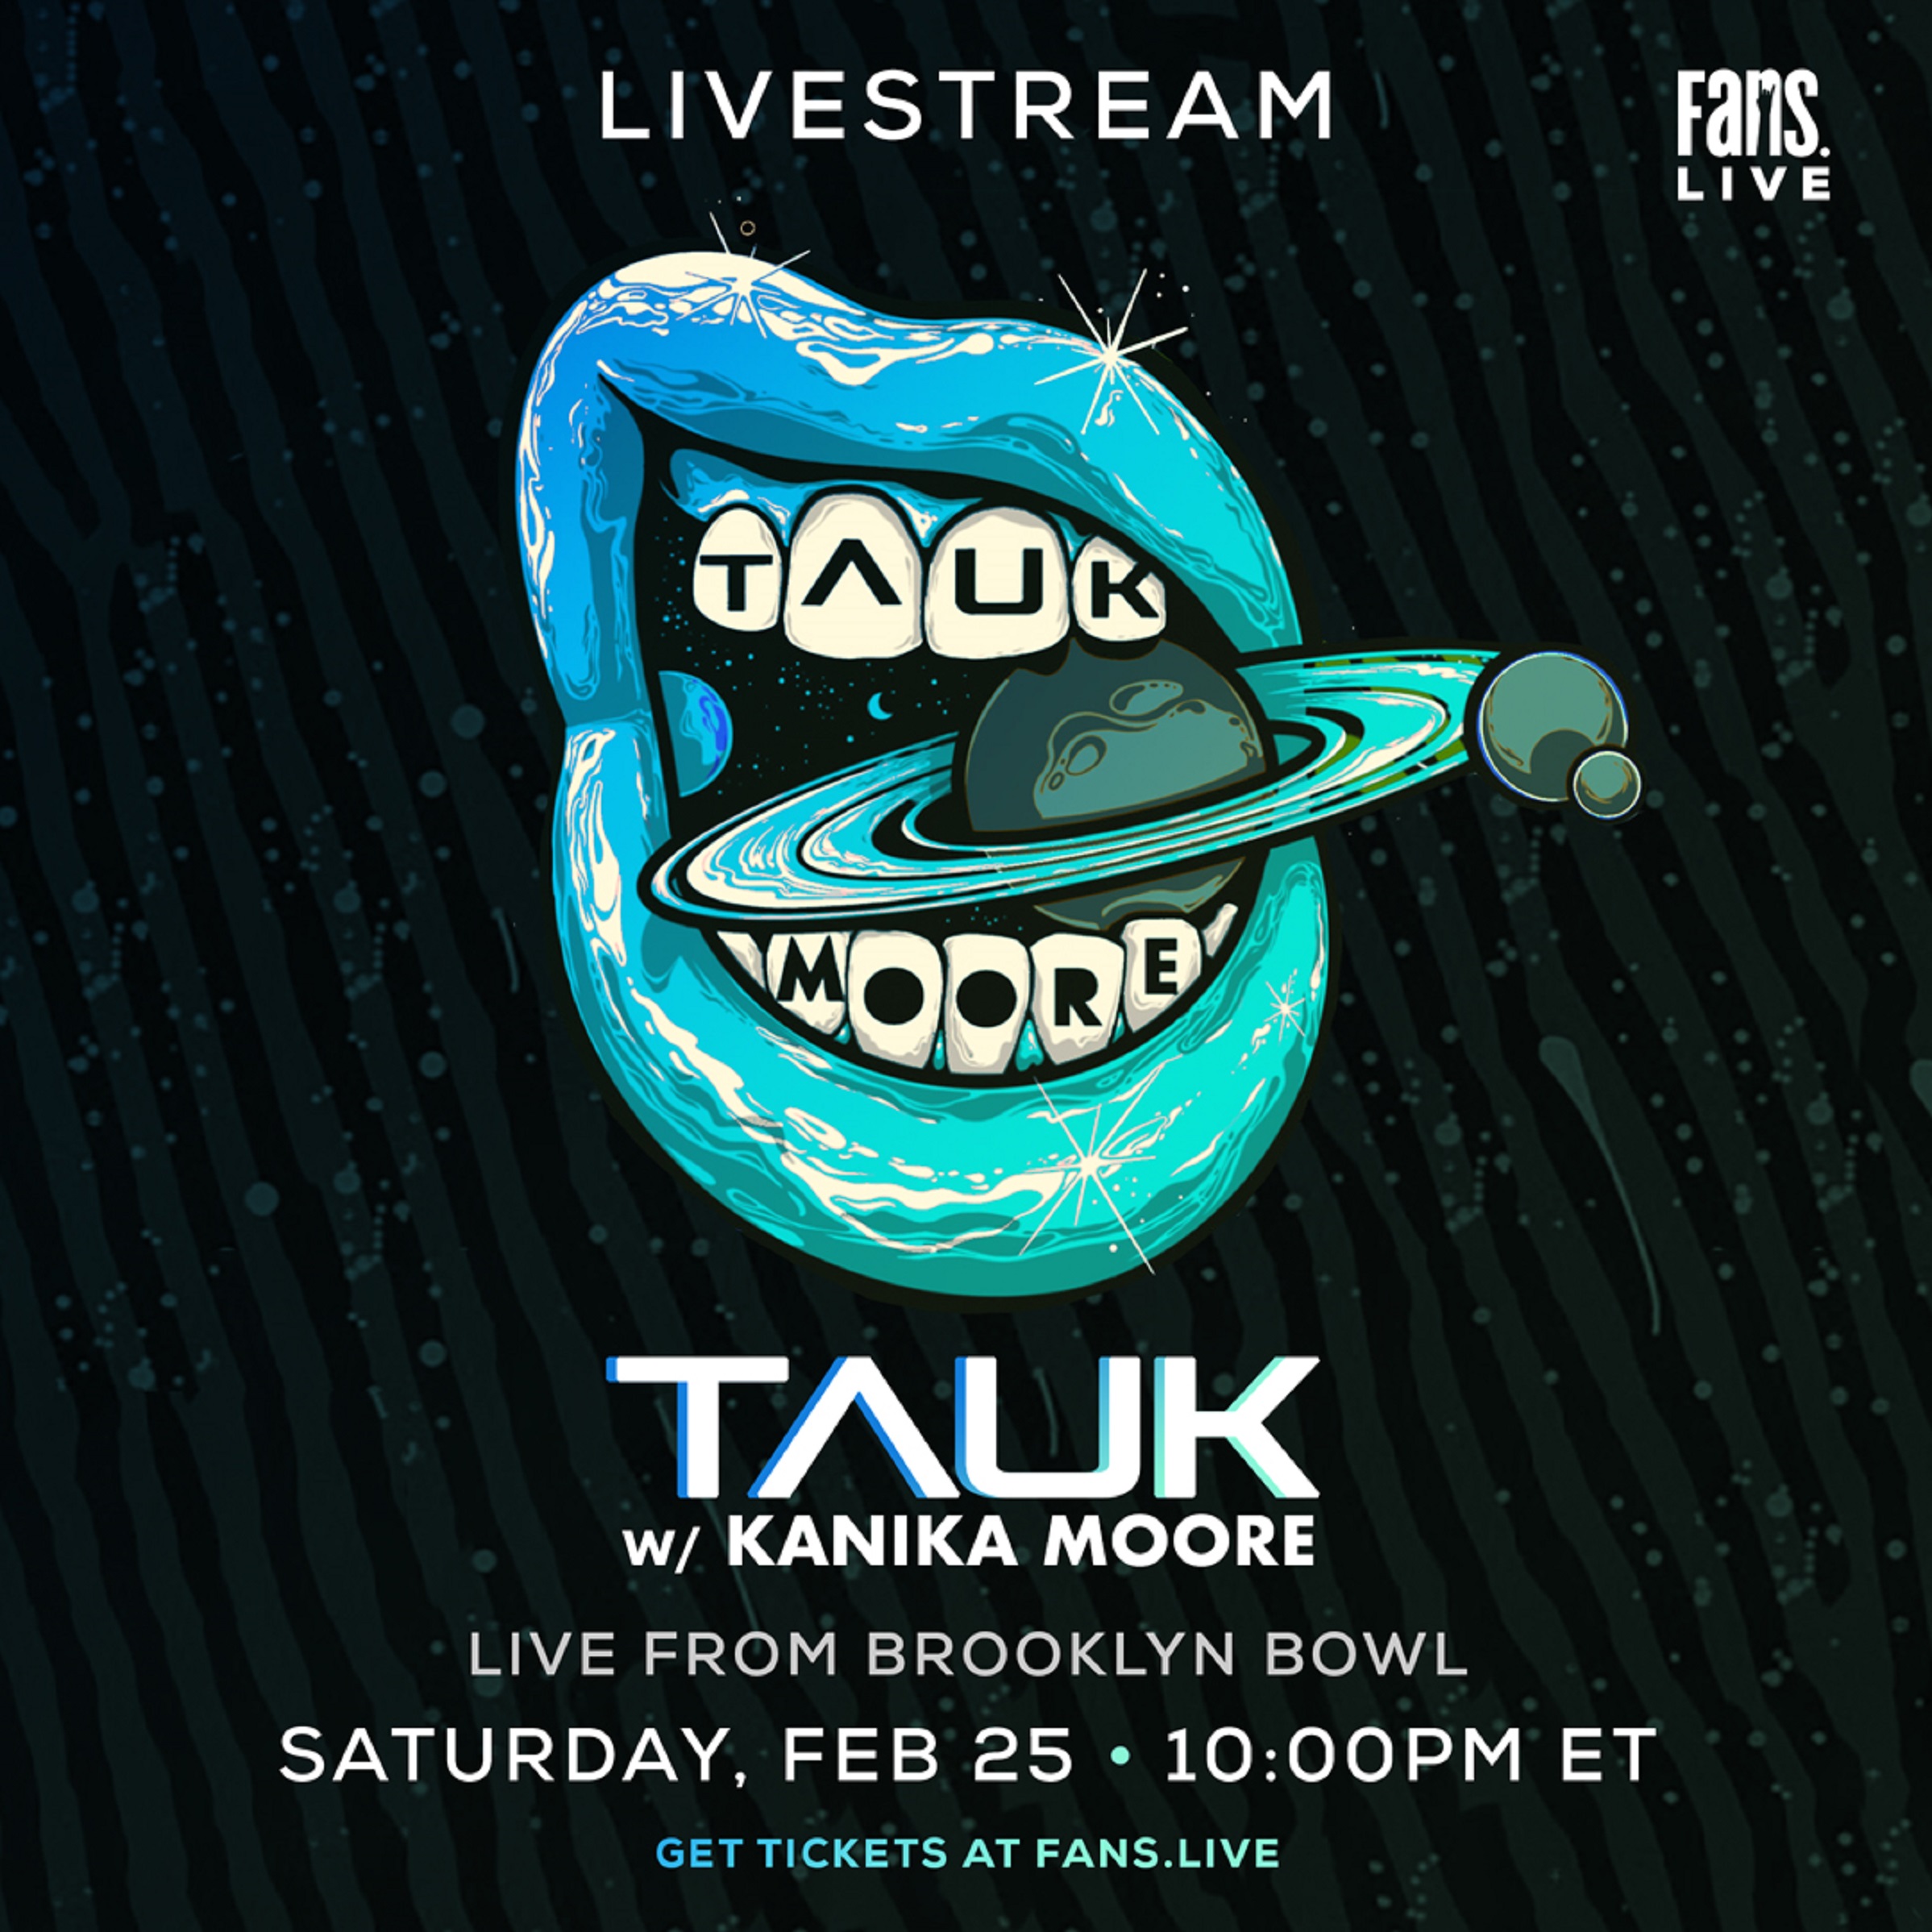 FREE LIVESTREAM of TAUK Moore (TAUK + Kanika Moore) live from Brooklyn Bowl this Saturday, February 25, 2023 at 8PM ET.